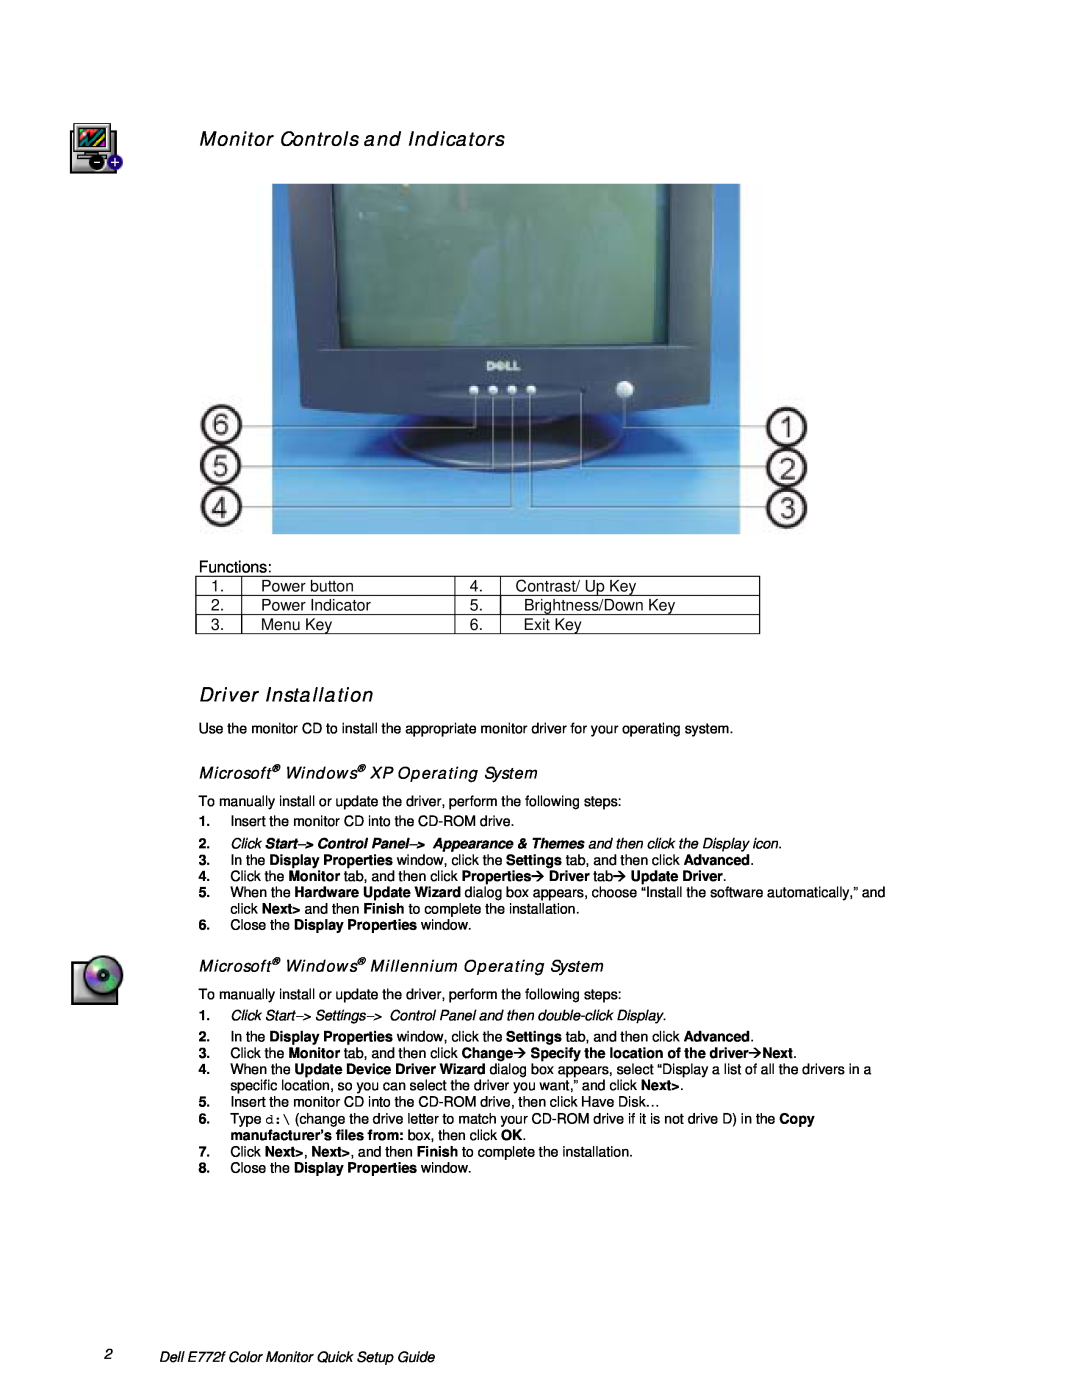 Dell E772f Monitor Controls and Indicators, Driver Installation, Microsoft Windows XP Operating System, Functions 